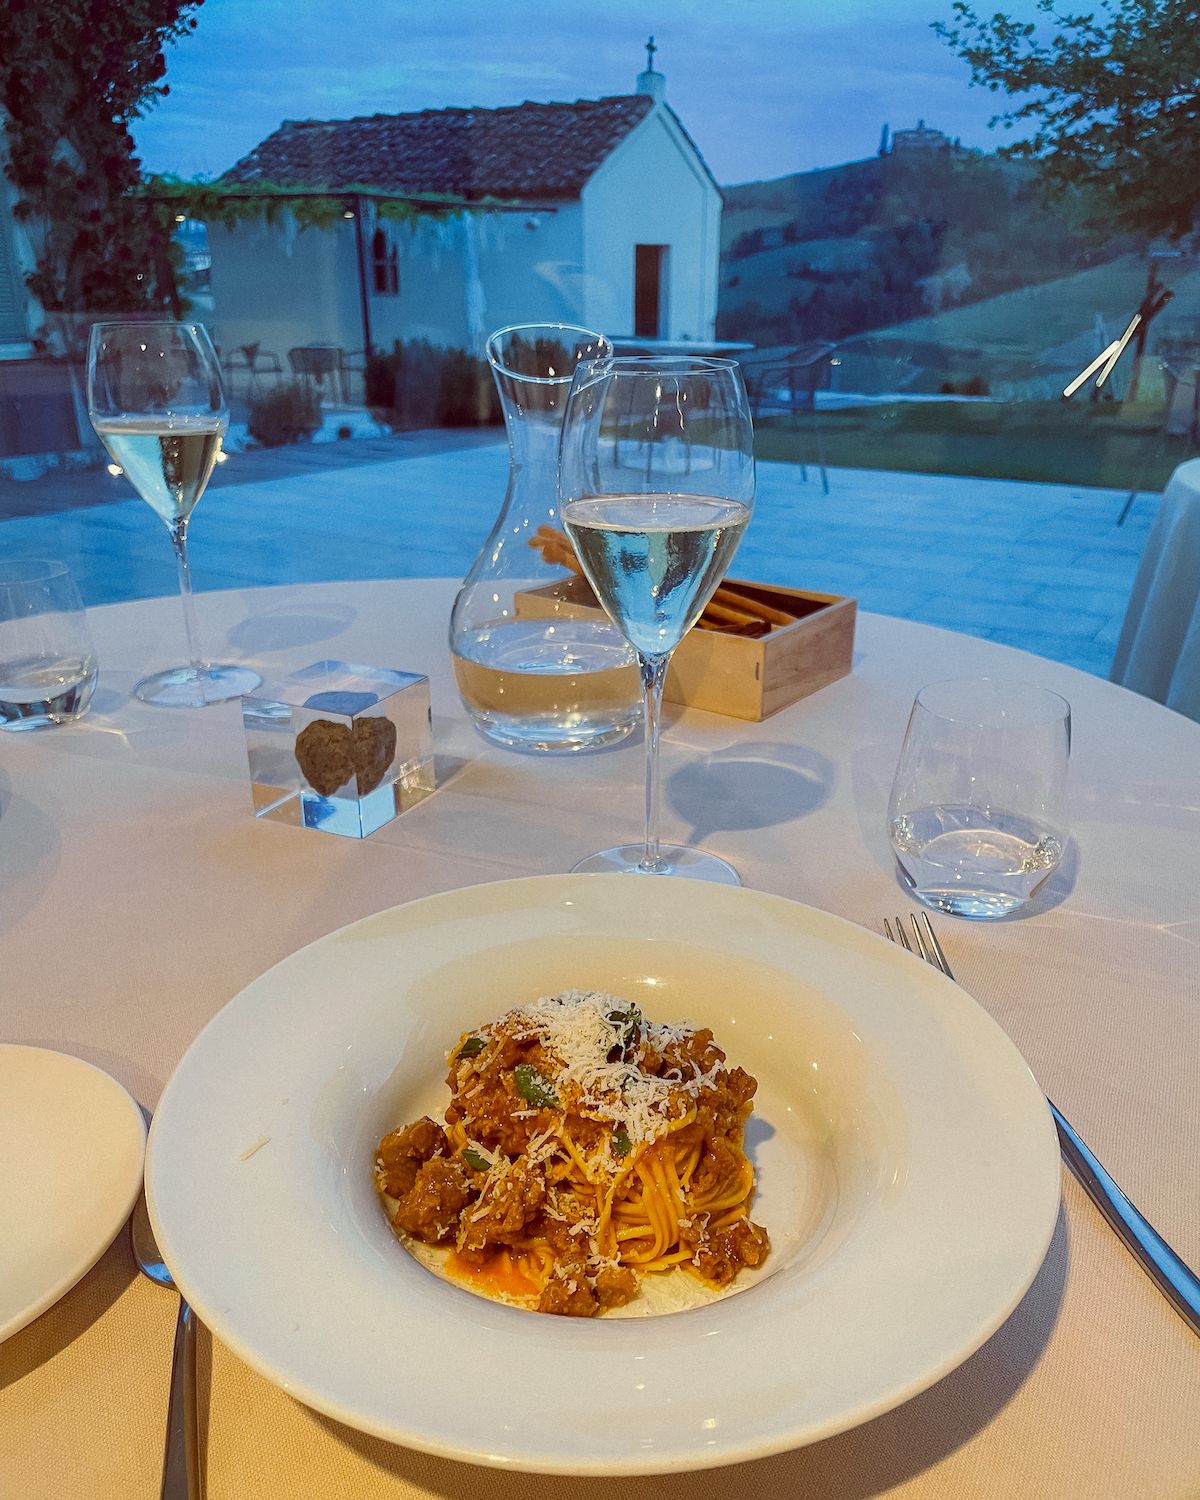 Spaghetti bolognese on a table with views small white church and a Barolo vineyard at dusk